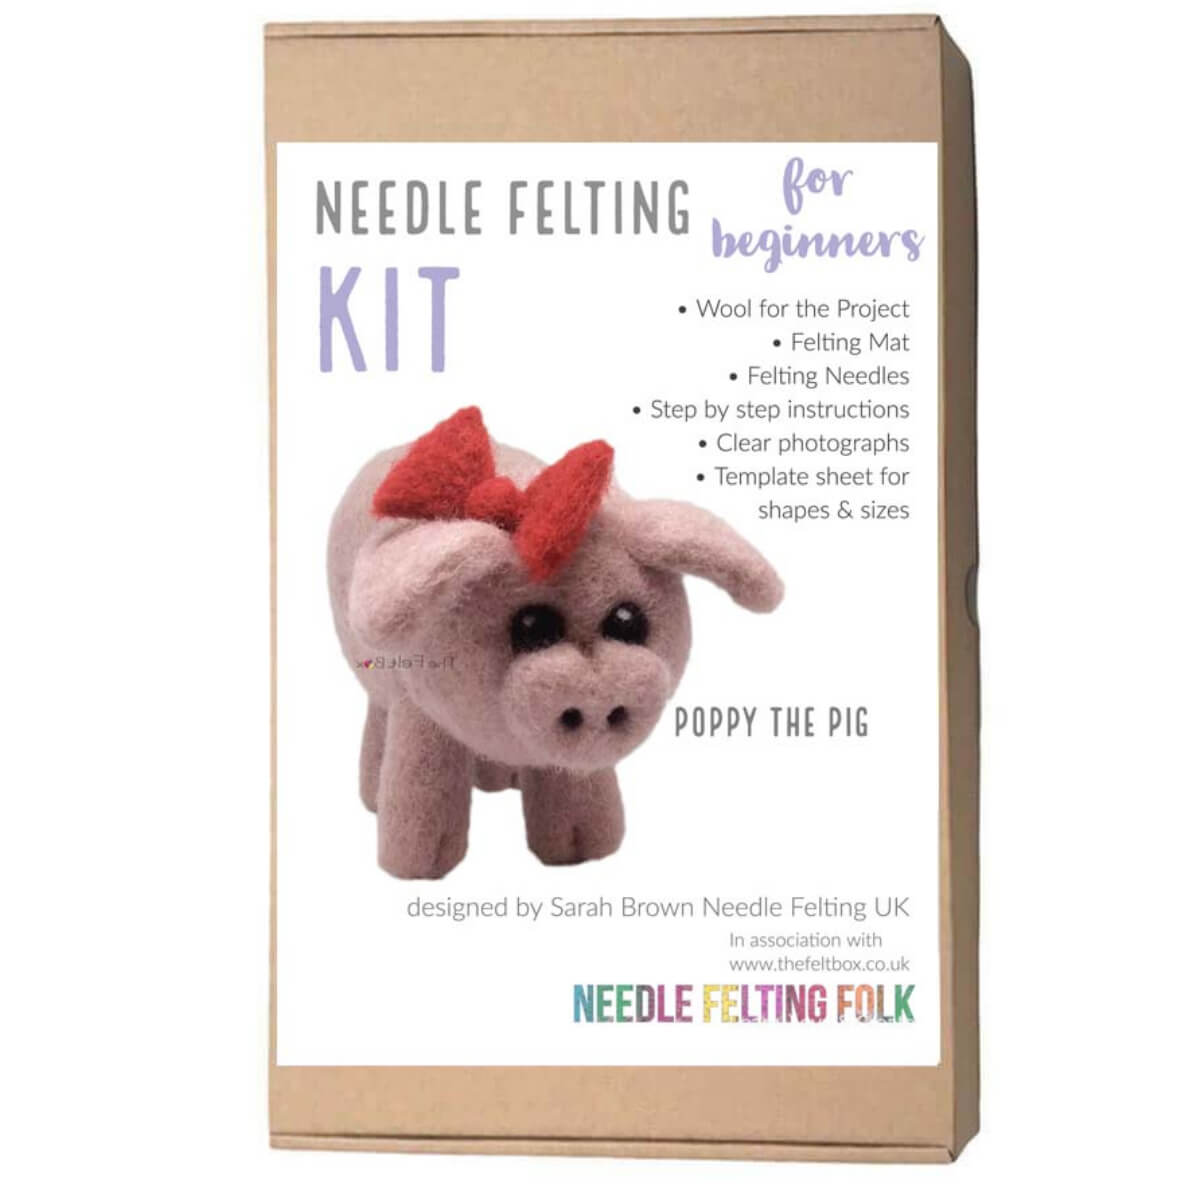 Needle Felting Kit for Beginners - Poppy the Pig by Sarah Brown. Makes 2